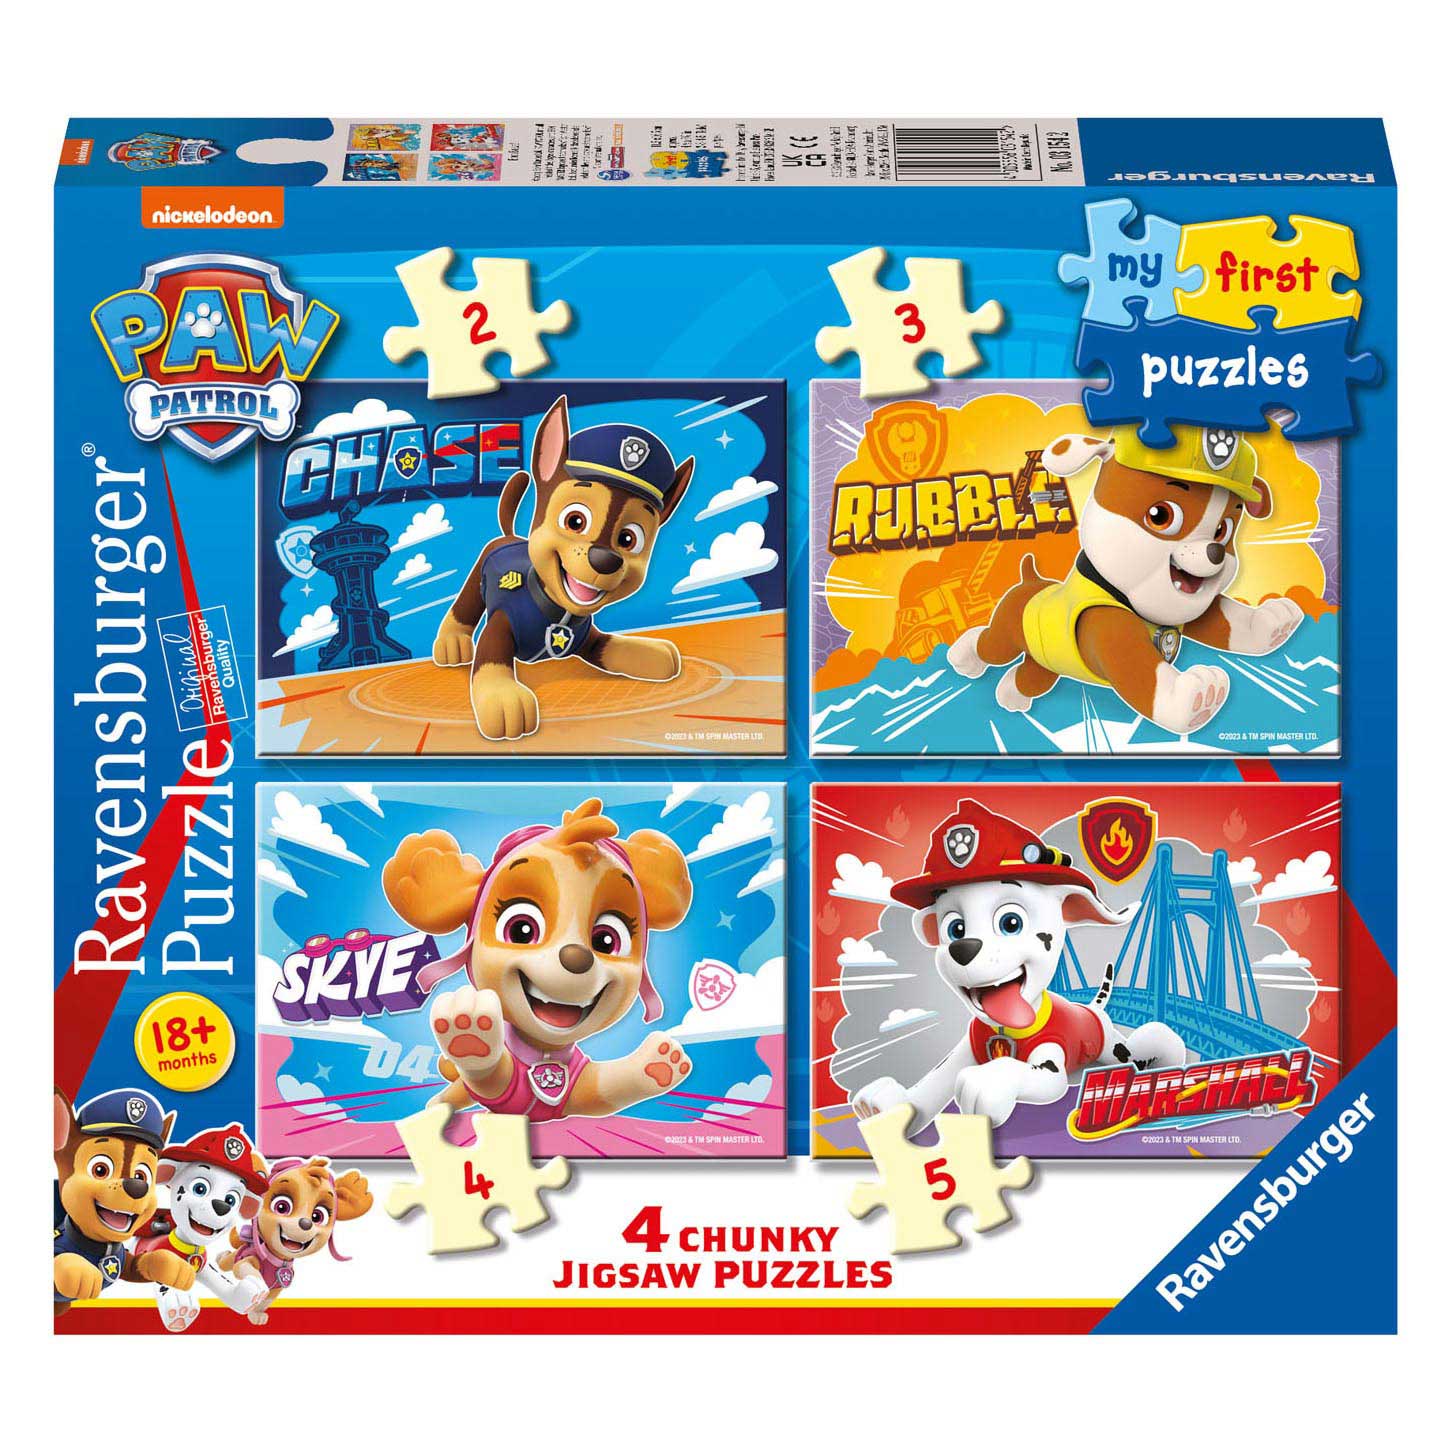 ontsnappen universiteitsstudent Mortal Ravensburger My First Puzzles PAW Patrol, 4in1 | Thimble Toys